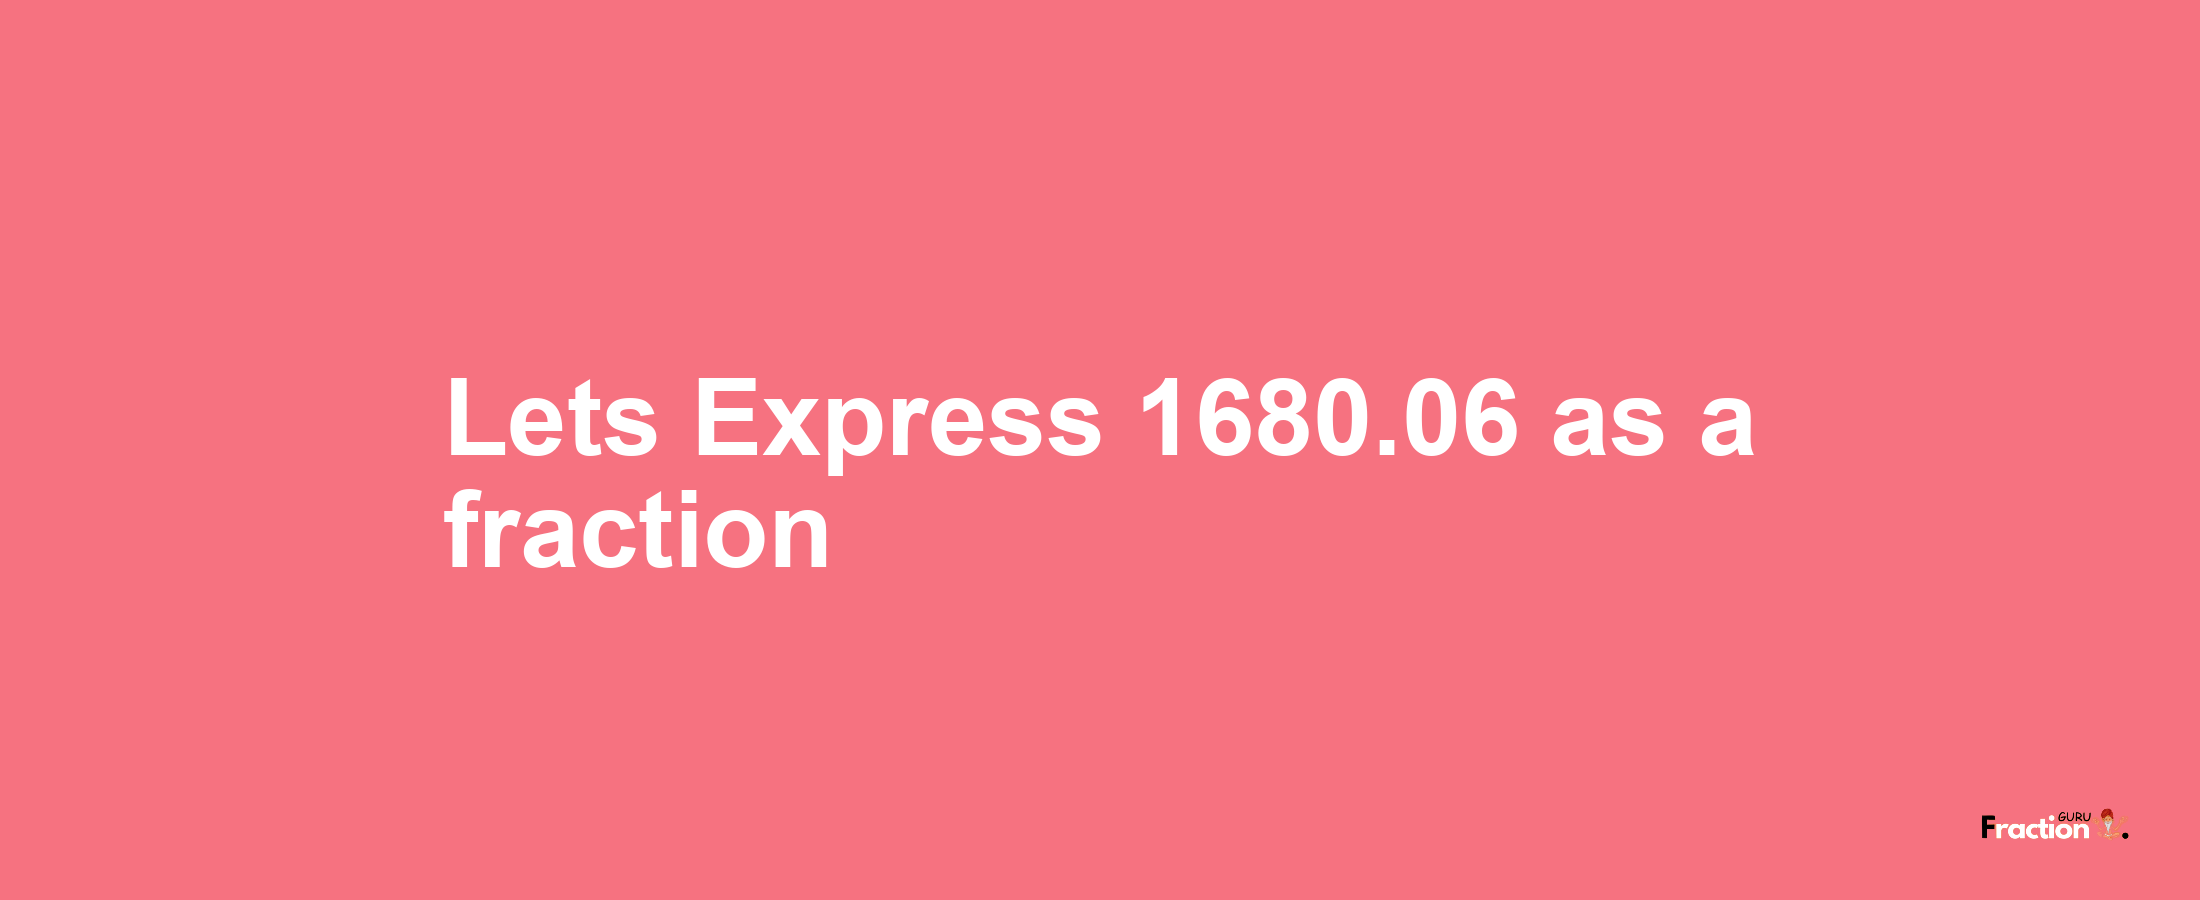 Lets Express 1680.06 as afraction